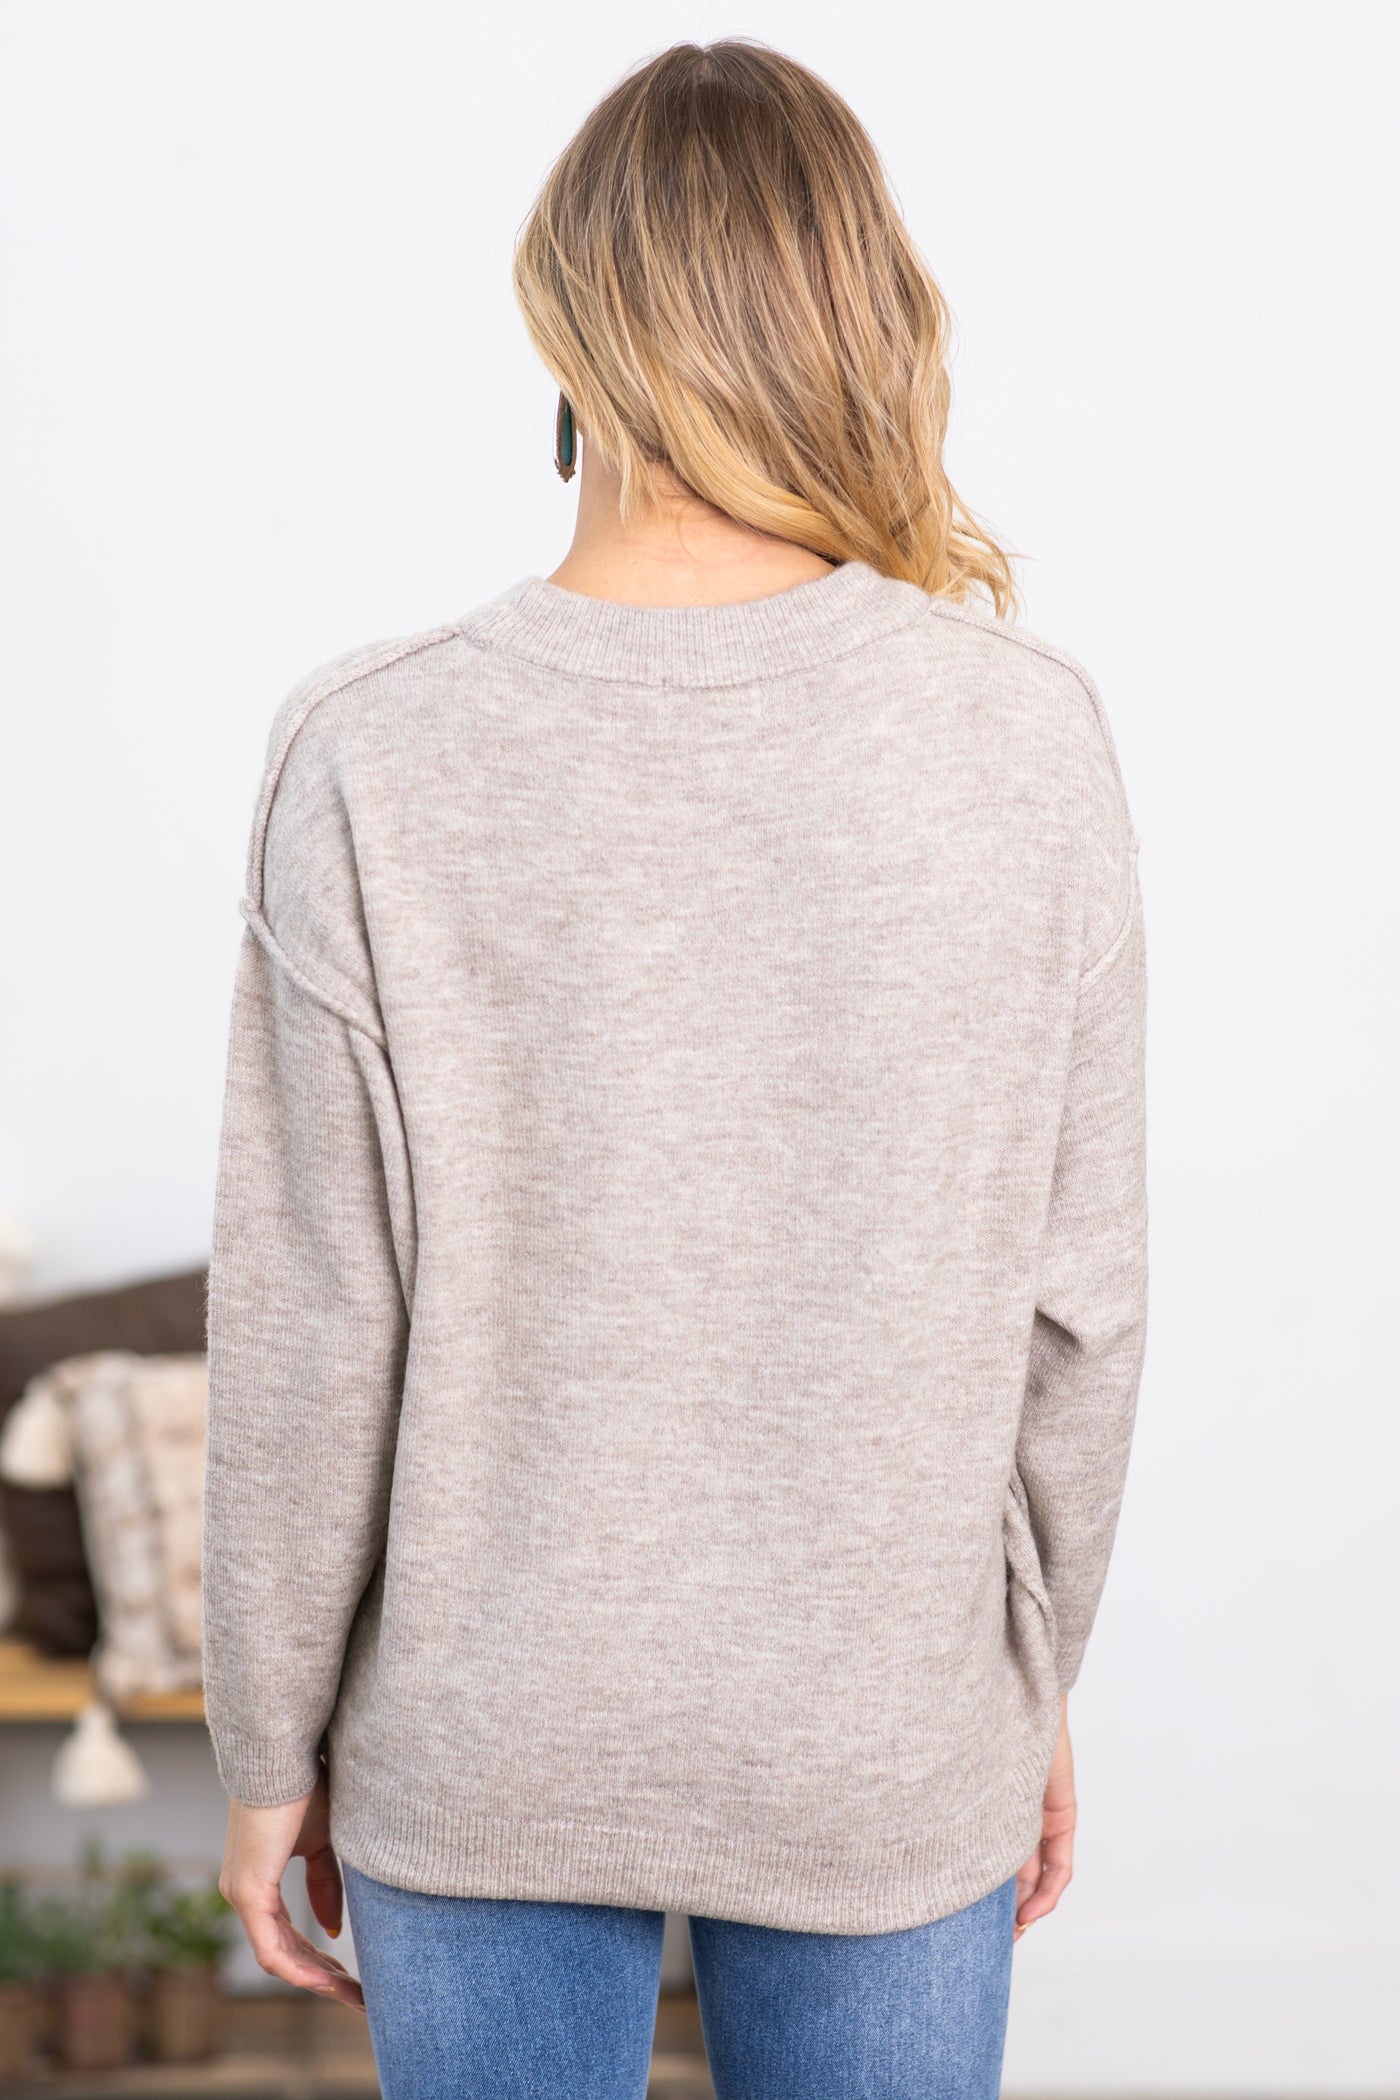 Oatmeal Garment Dyed Front Seam Sweater